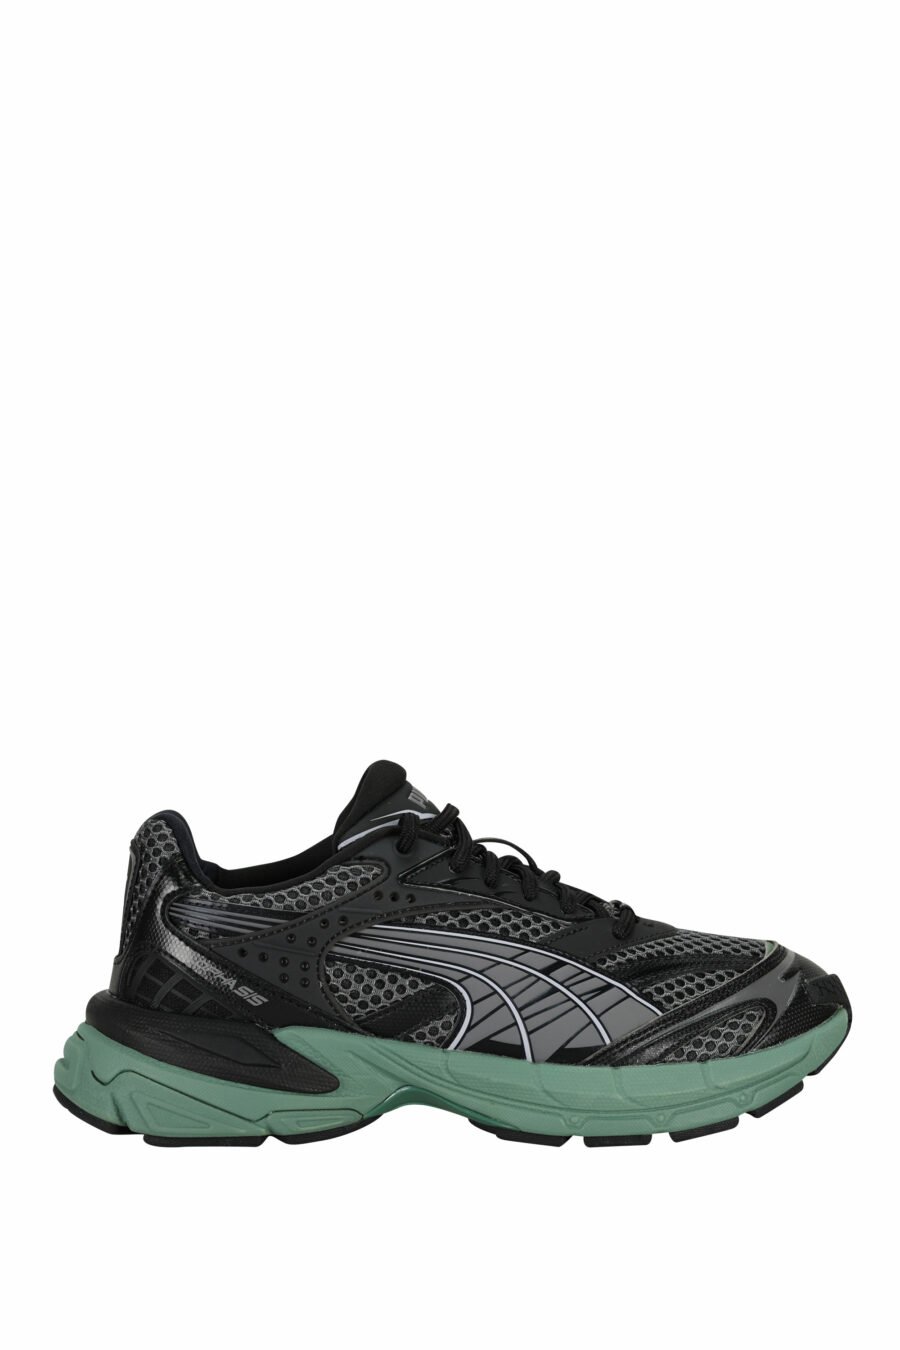 Black trainers with green "velophasis" - 4099686518615